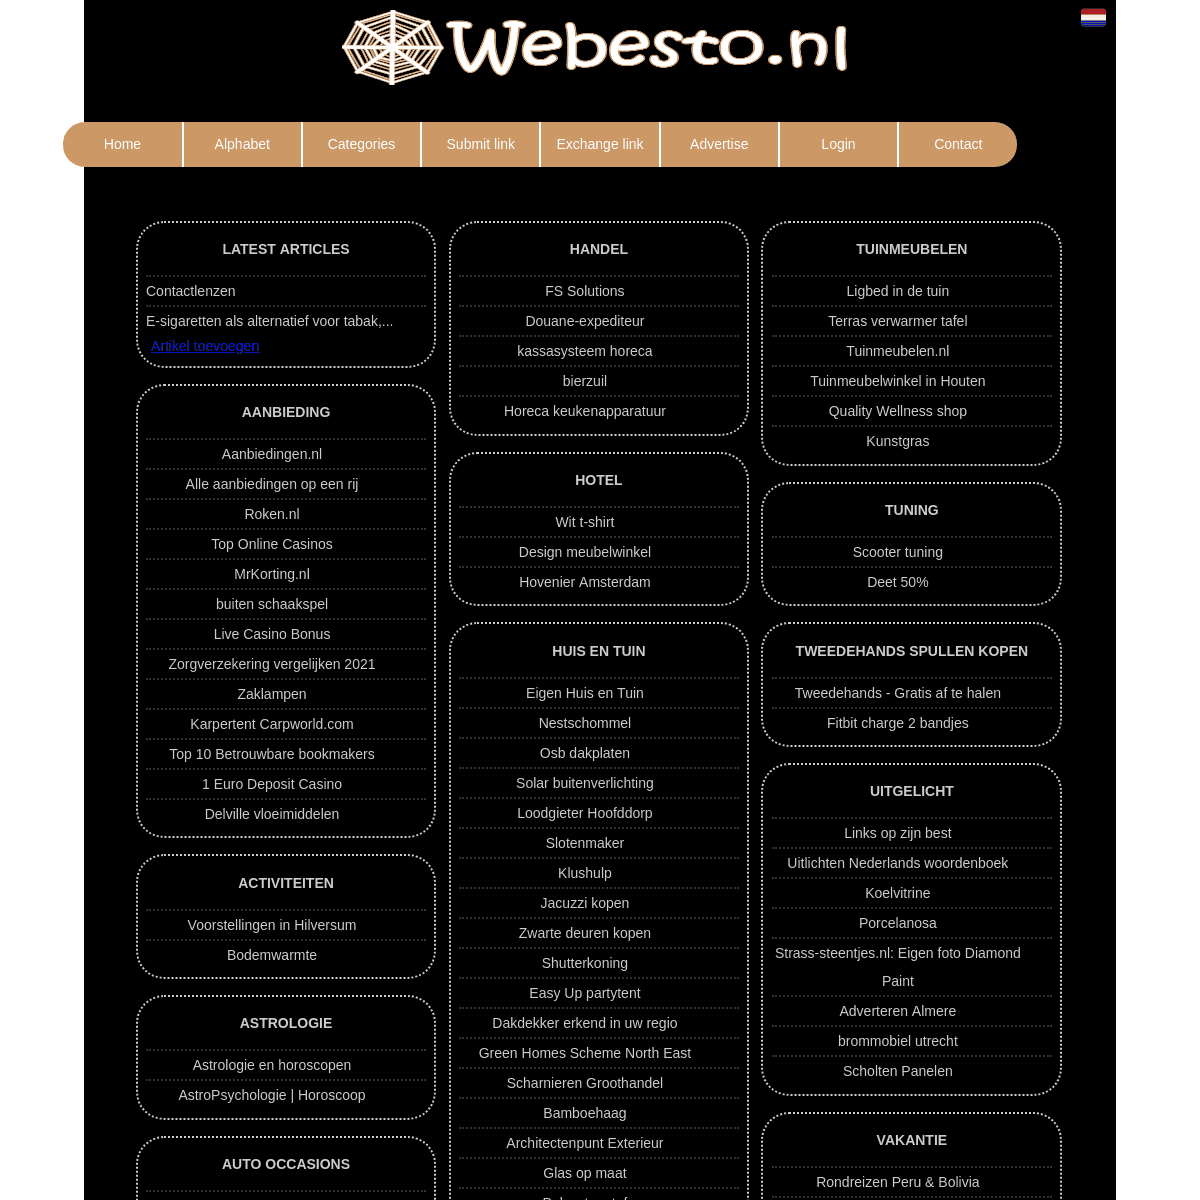 A complete backup of https://webesto.nl